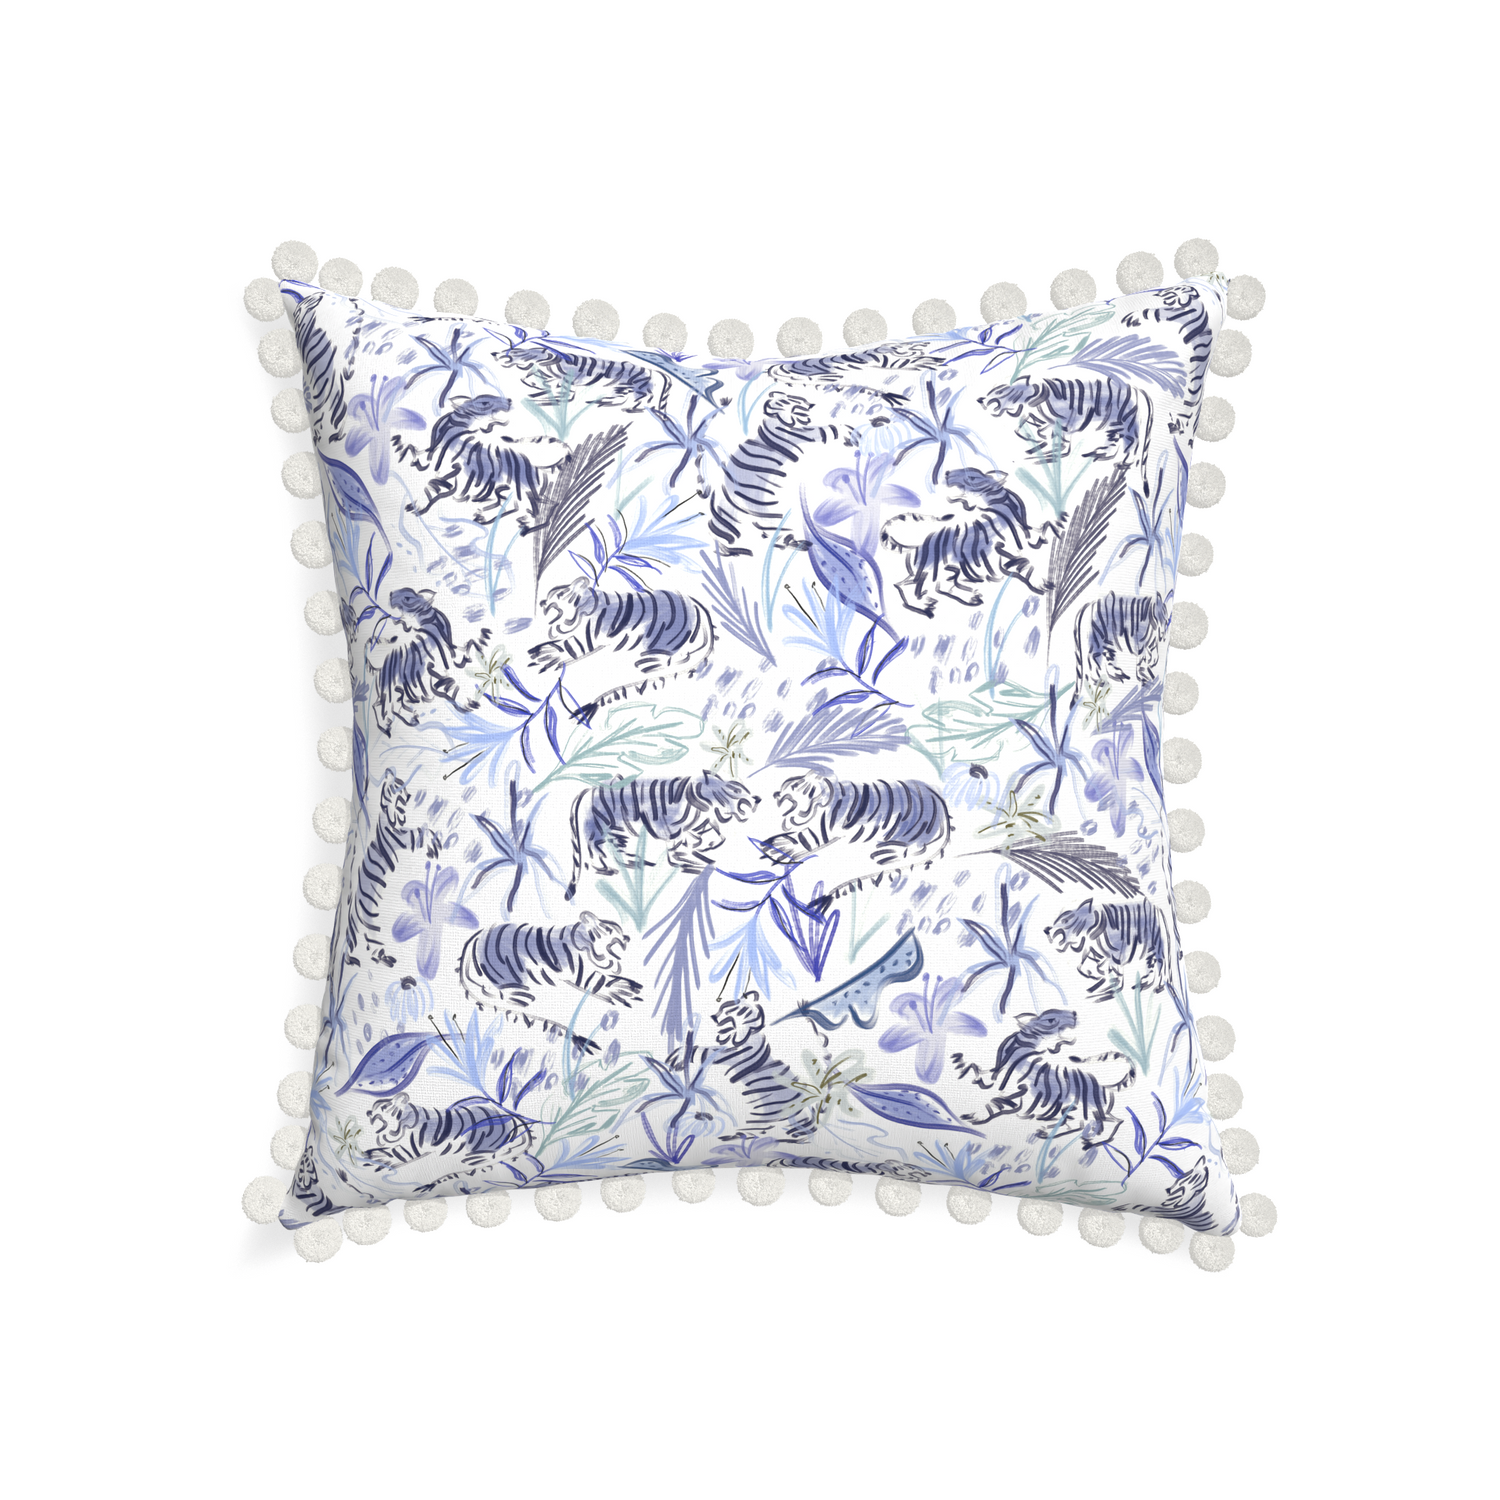 22-square frida blue custom blue with intricate tiger designpillow with snow pom pom on white background